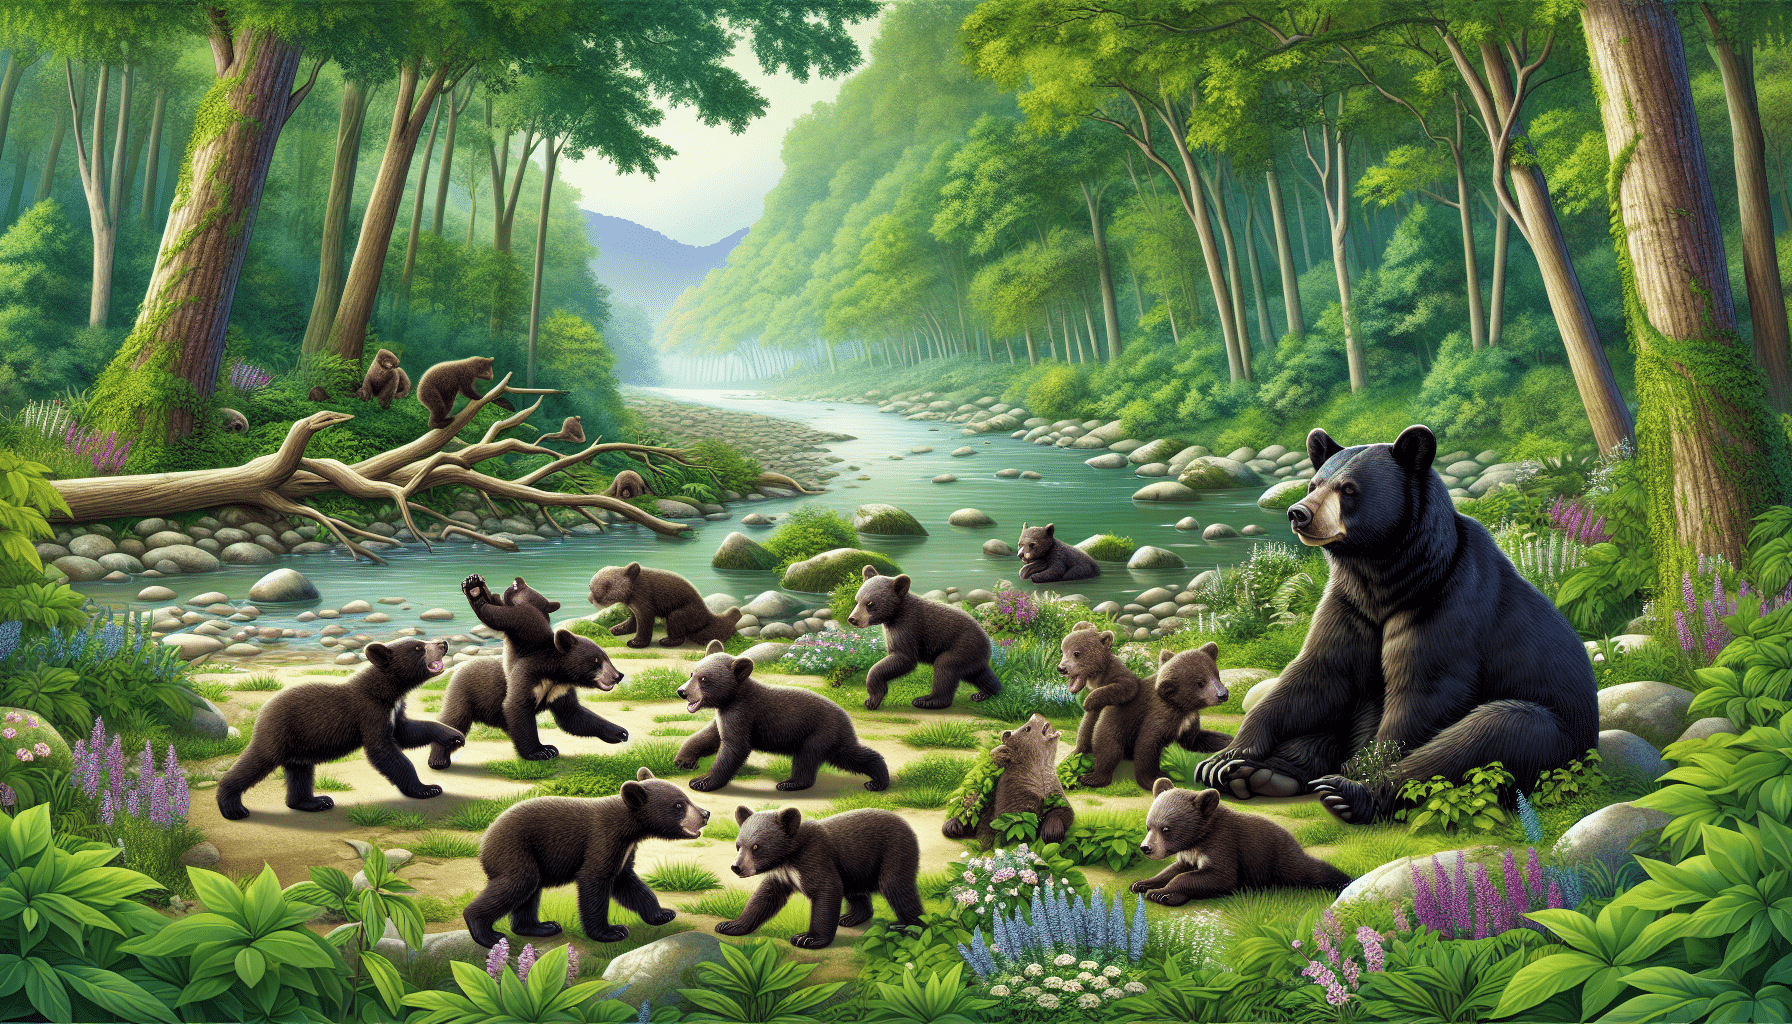 Visualize a serene natural habitat with lush greenery and a serene river flowing by. In this peaceful setting, an adult black bear is lounging, looking satisfied and calm. Not far from the bear, a group of excitable cubs, ranging in different ages from younger to older, explore the terrain. Some are shown play wrestling, others are nosing at plants, and some are trying to climb small trees. There are no human elements, text, brand names or logos in the image, maintaining the wild nature of the scene.